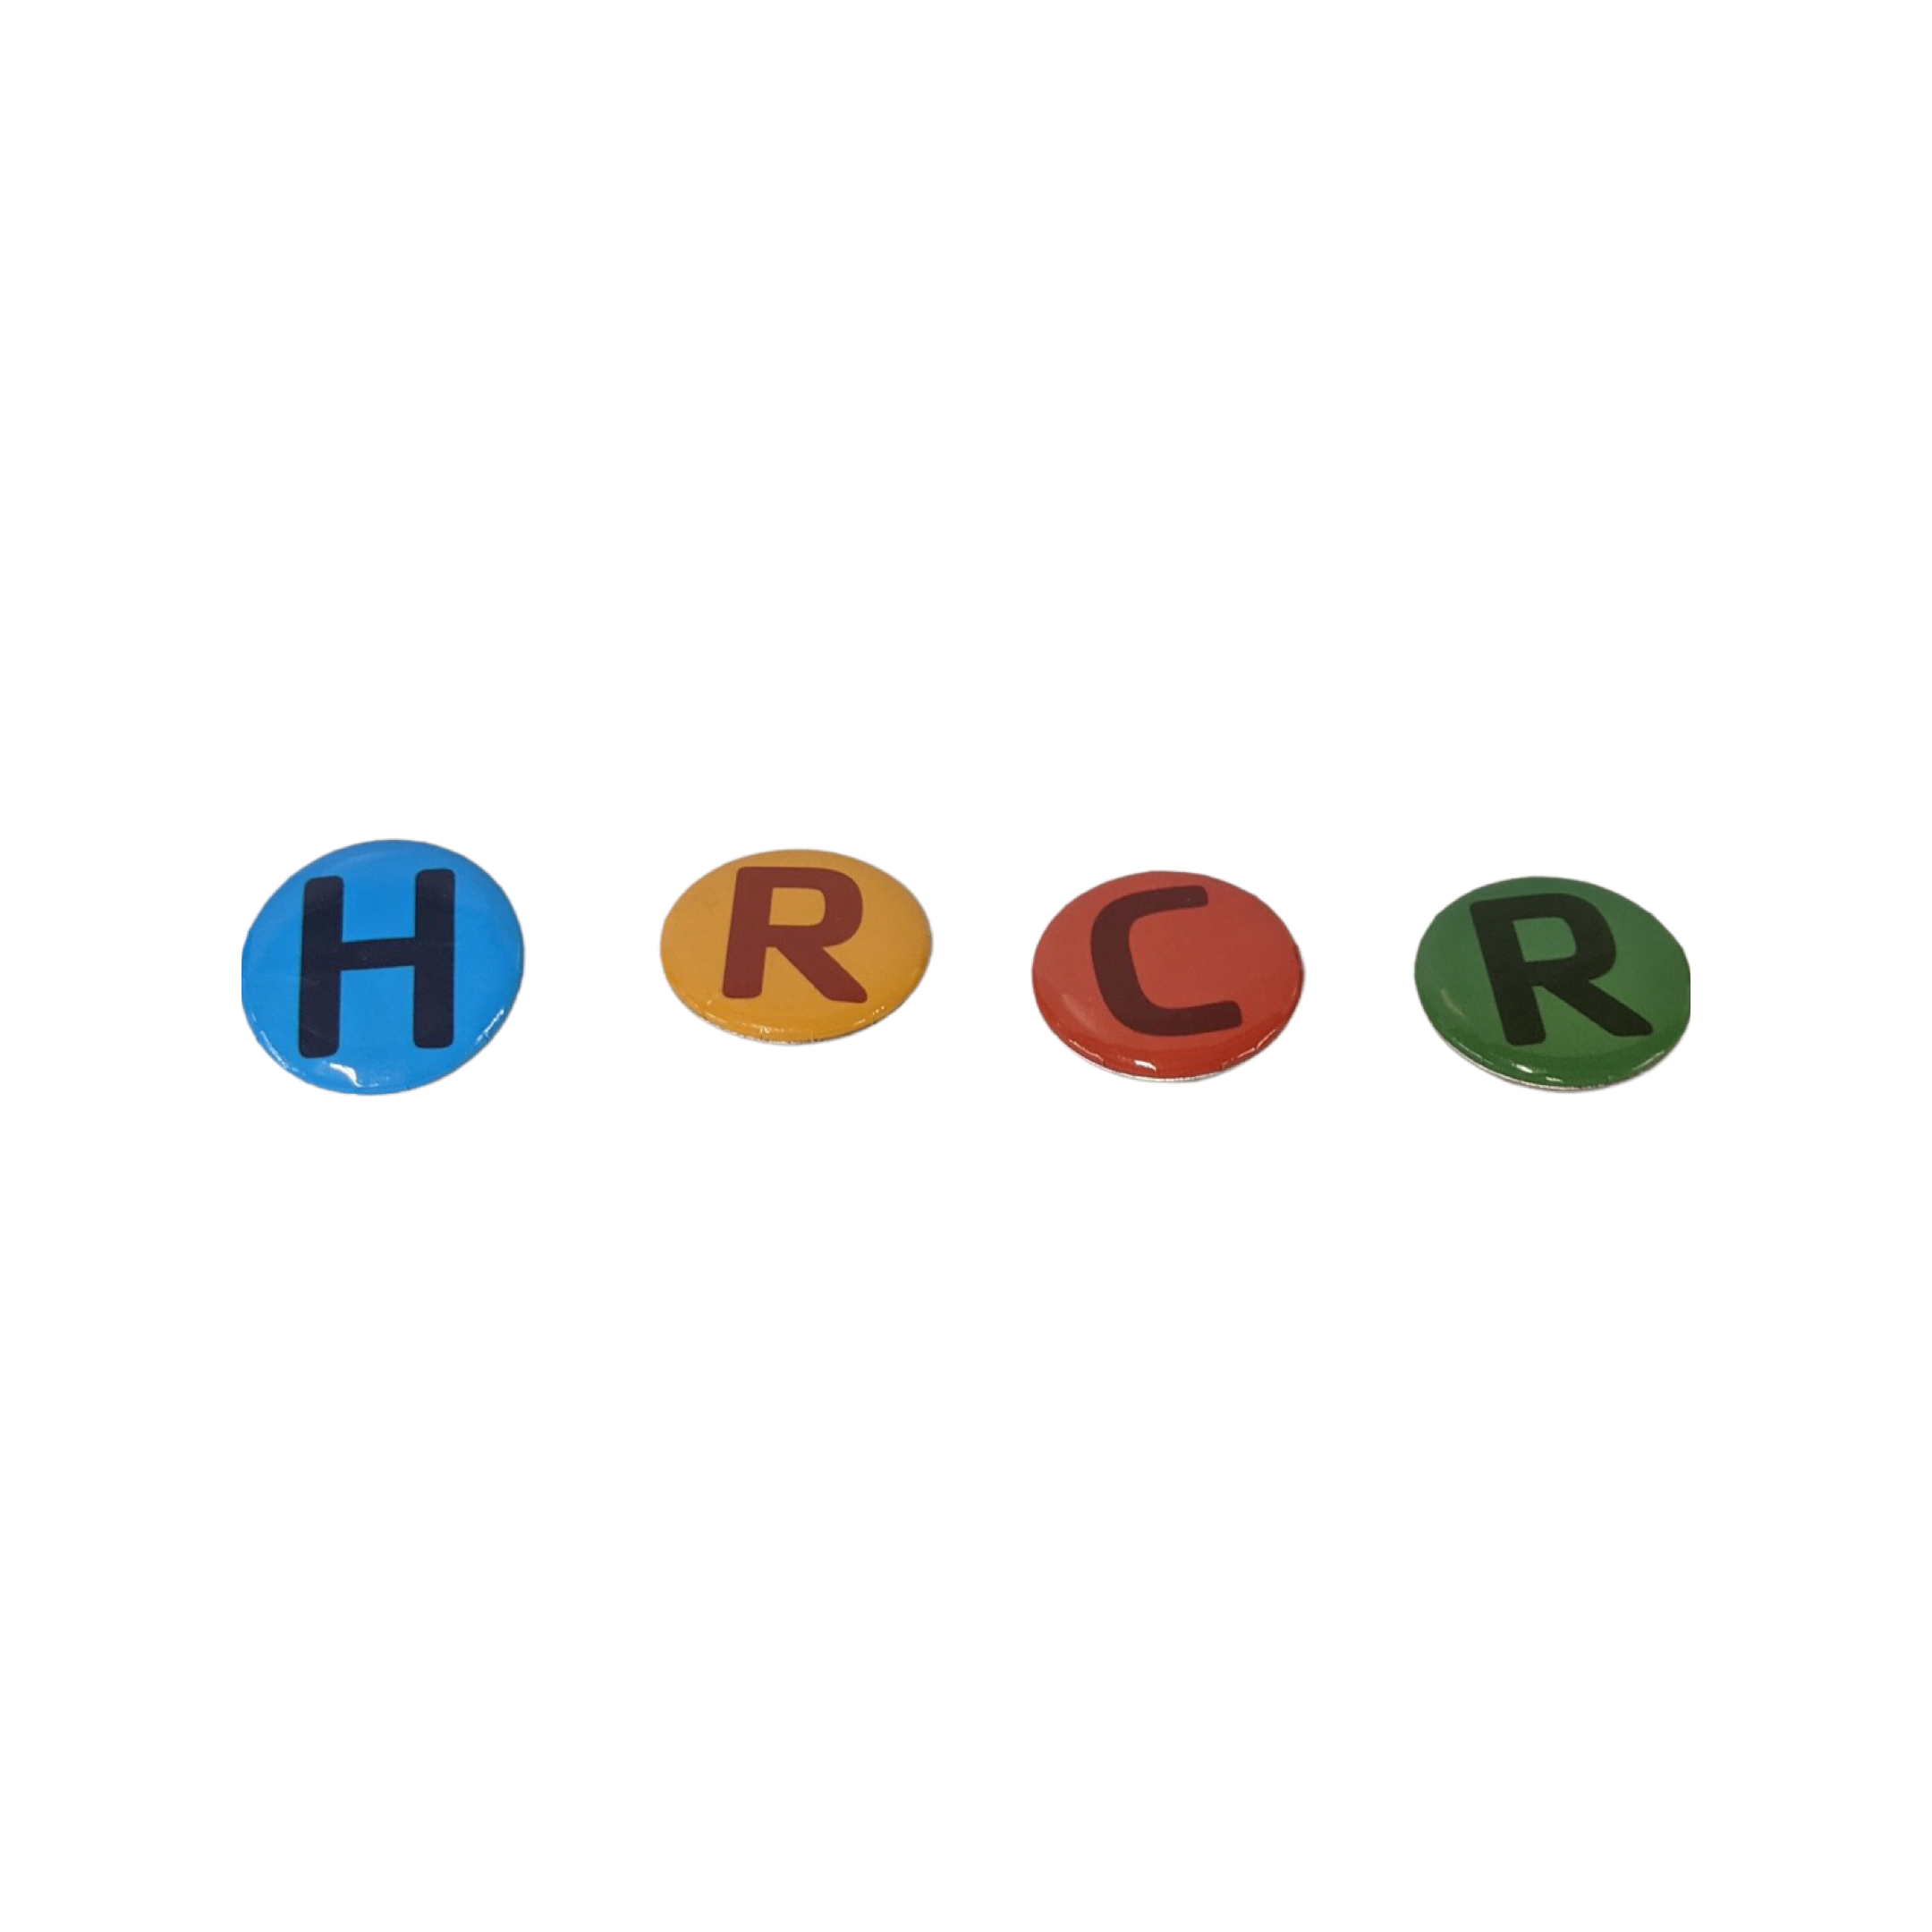 HCRR Buttons - $2